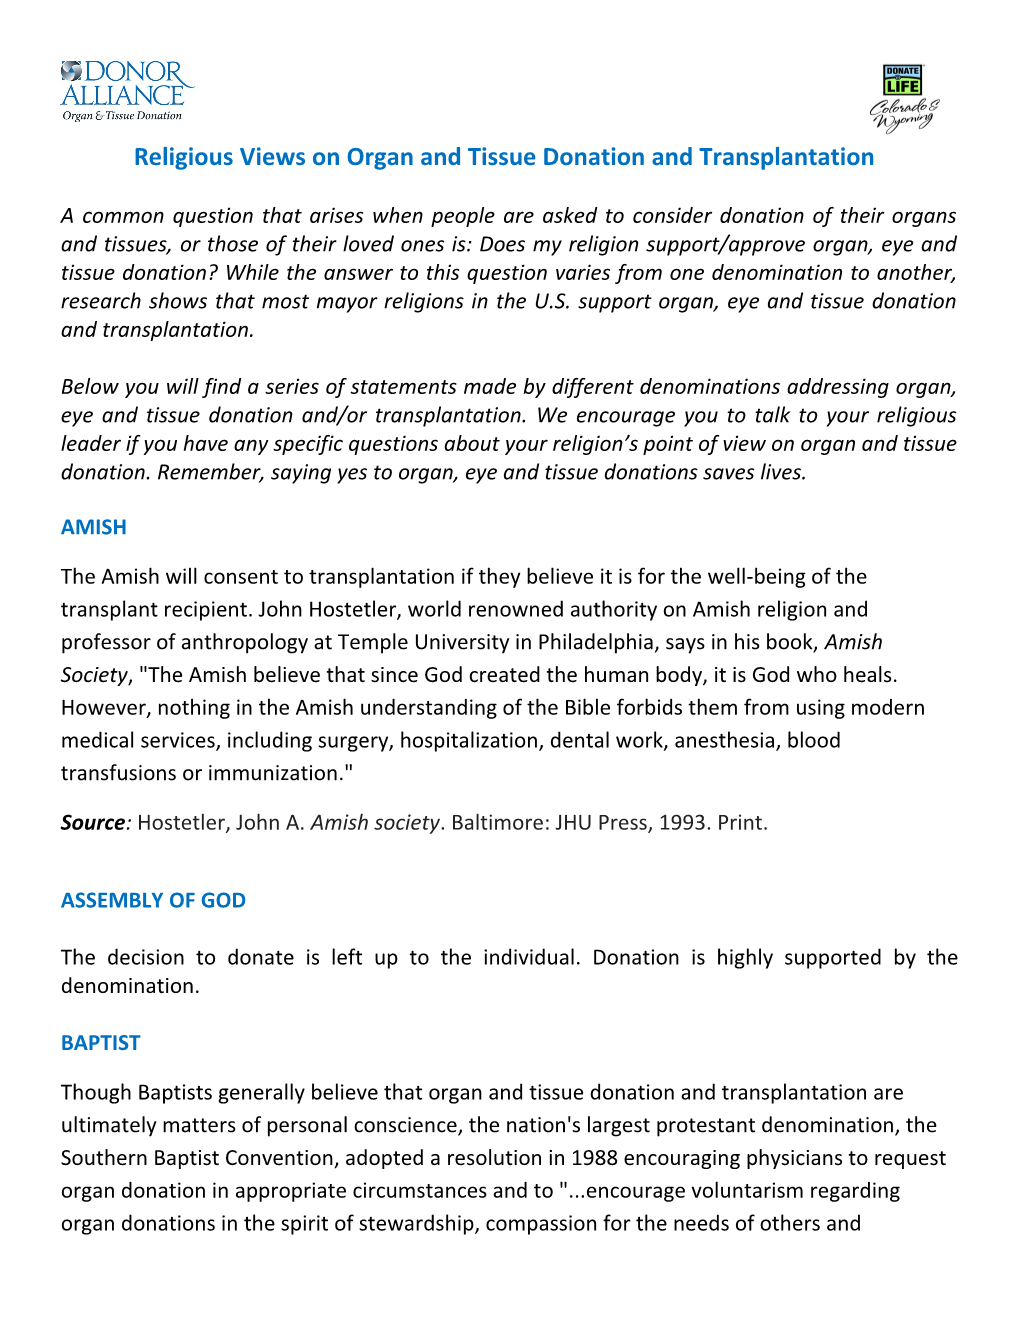 Religious Views on Organ and Tissue Donation and Transplantation